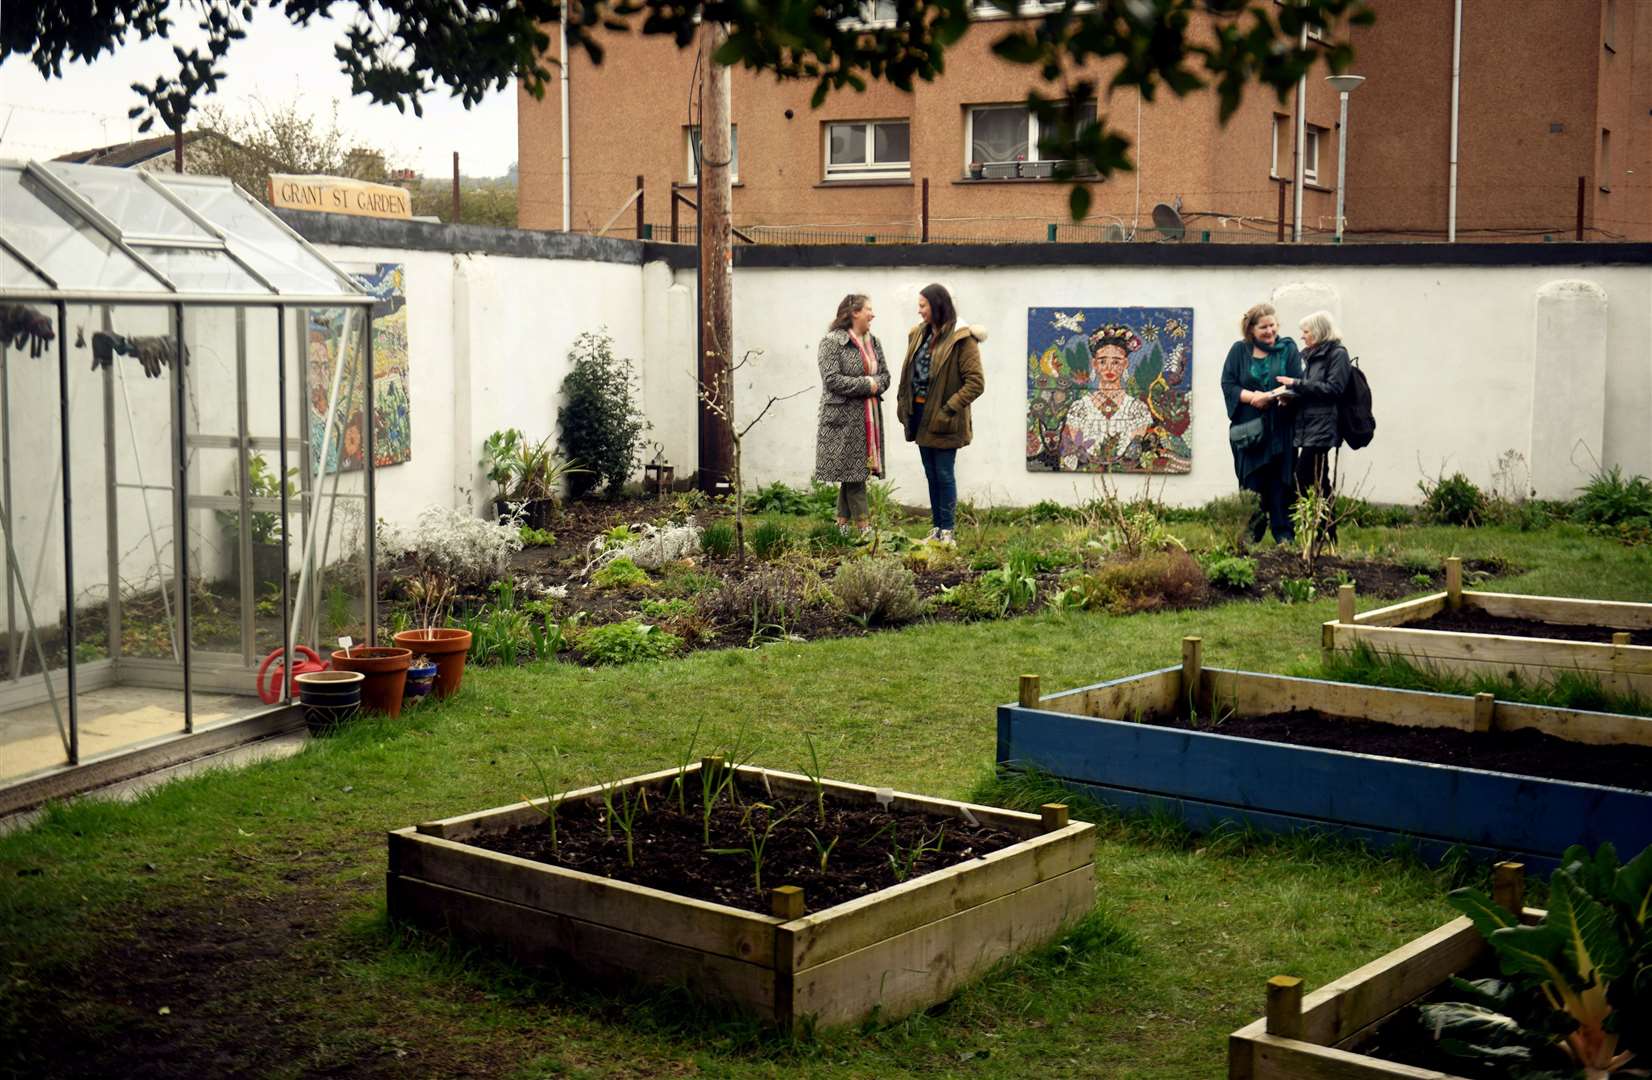 The Grant Street Community Garden has taken shape over the past two years. Picture: James Mackenzie